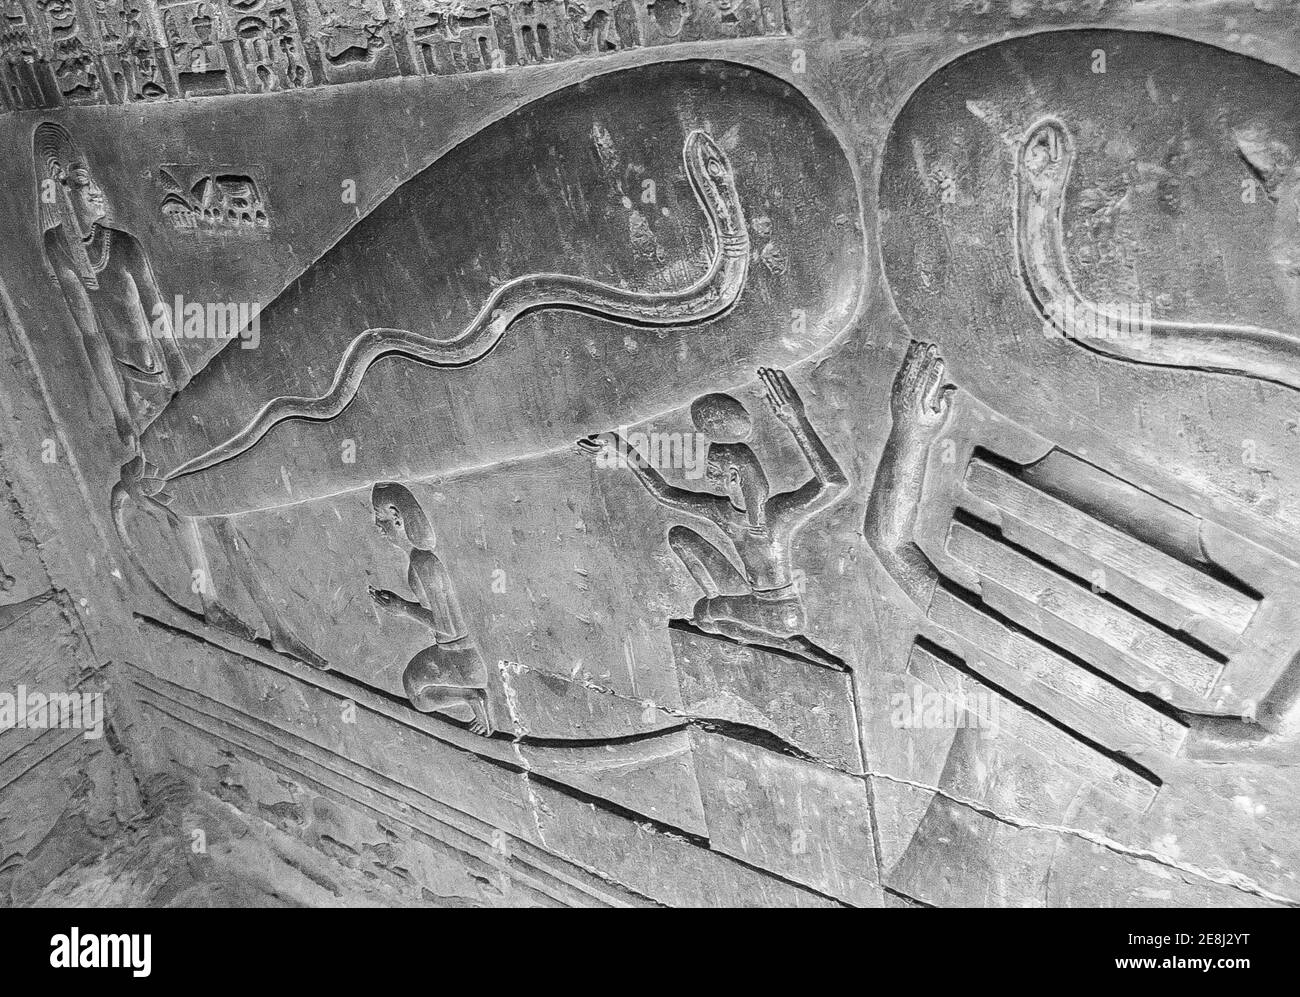 Egypt, Dendera temple, in a room, strange scene called 'light bulb', sometimes (wrongly) seen as a proof that Ancient Egyptians knew electricity. Stock Photo